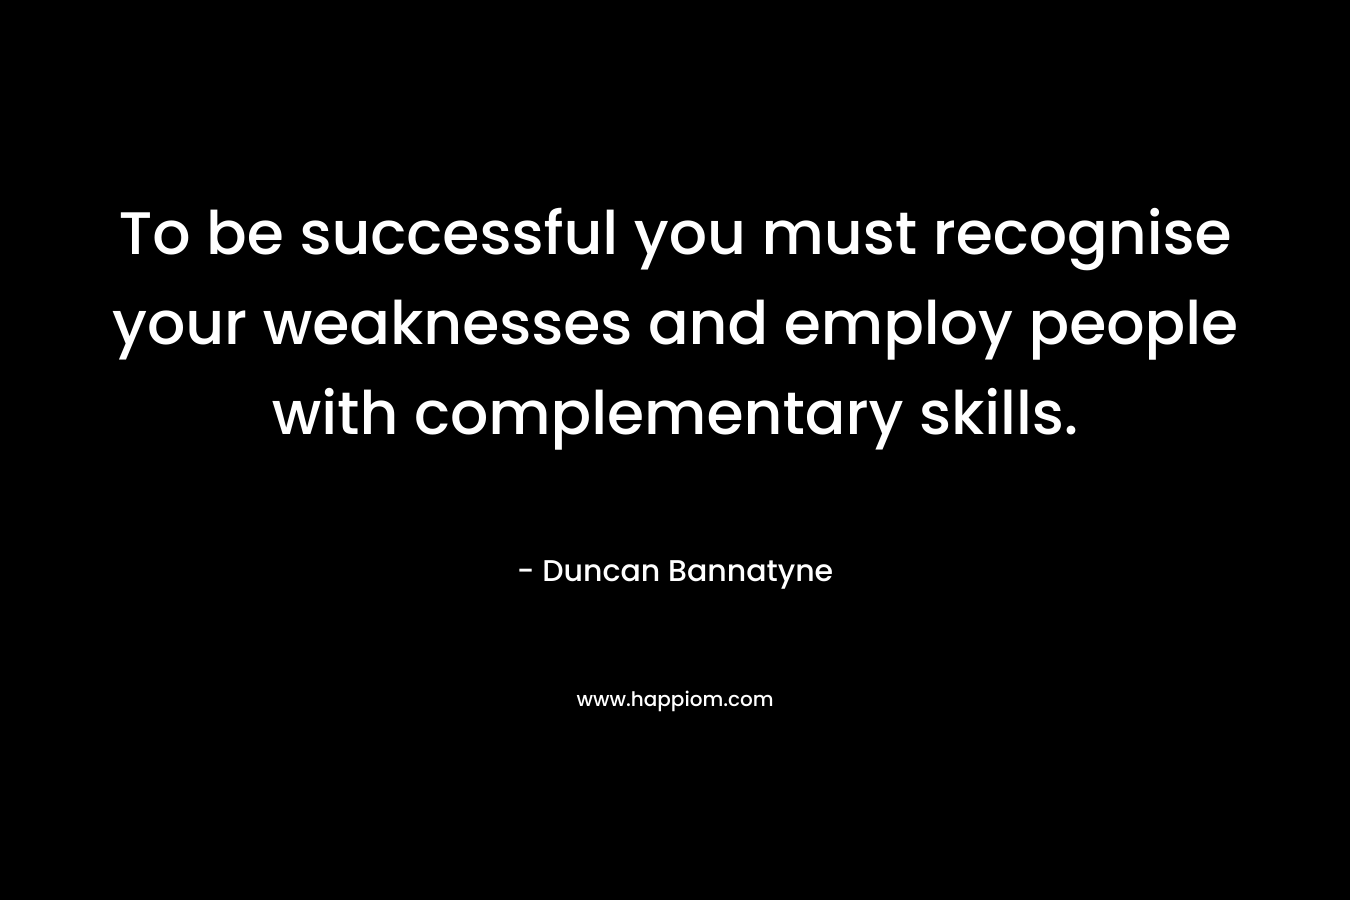 To be successful you must recognise your weaknesses and employ people with complementary skills. – Duncan Bannatyne